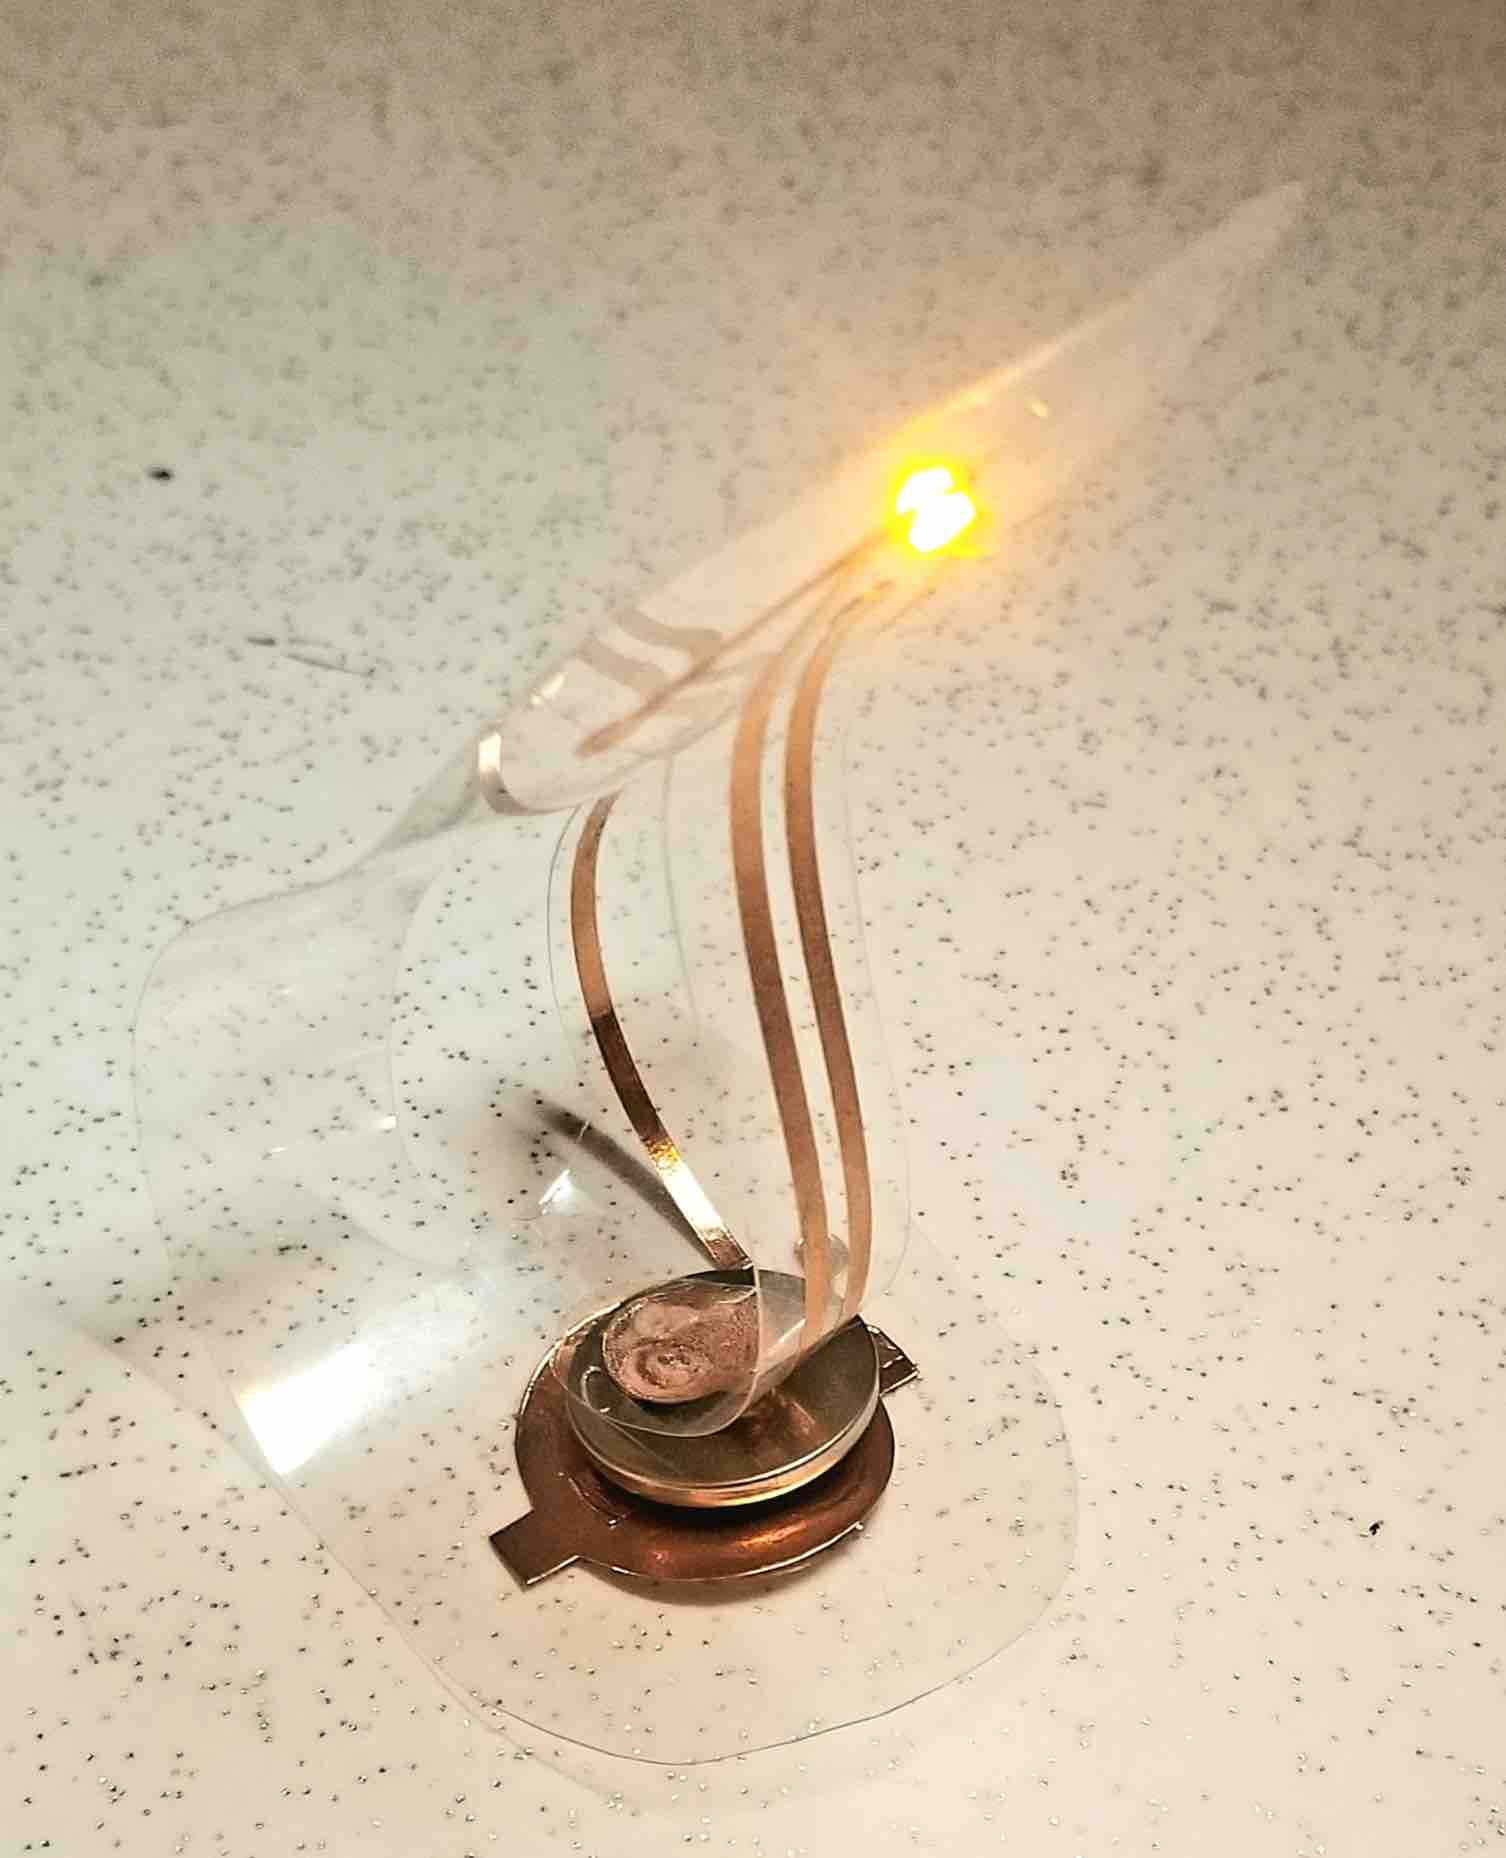 The bookmark as a light.